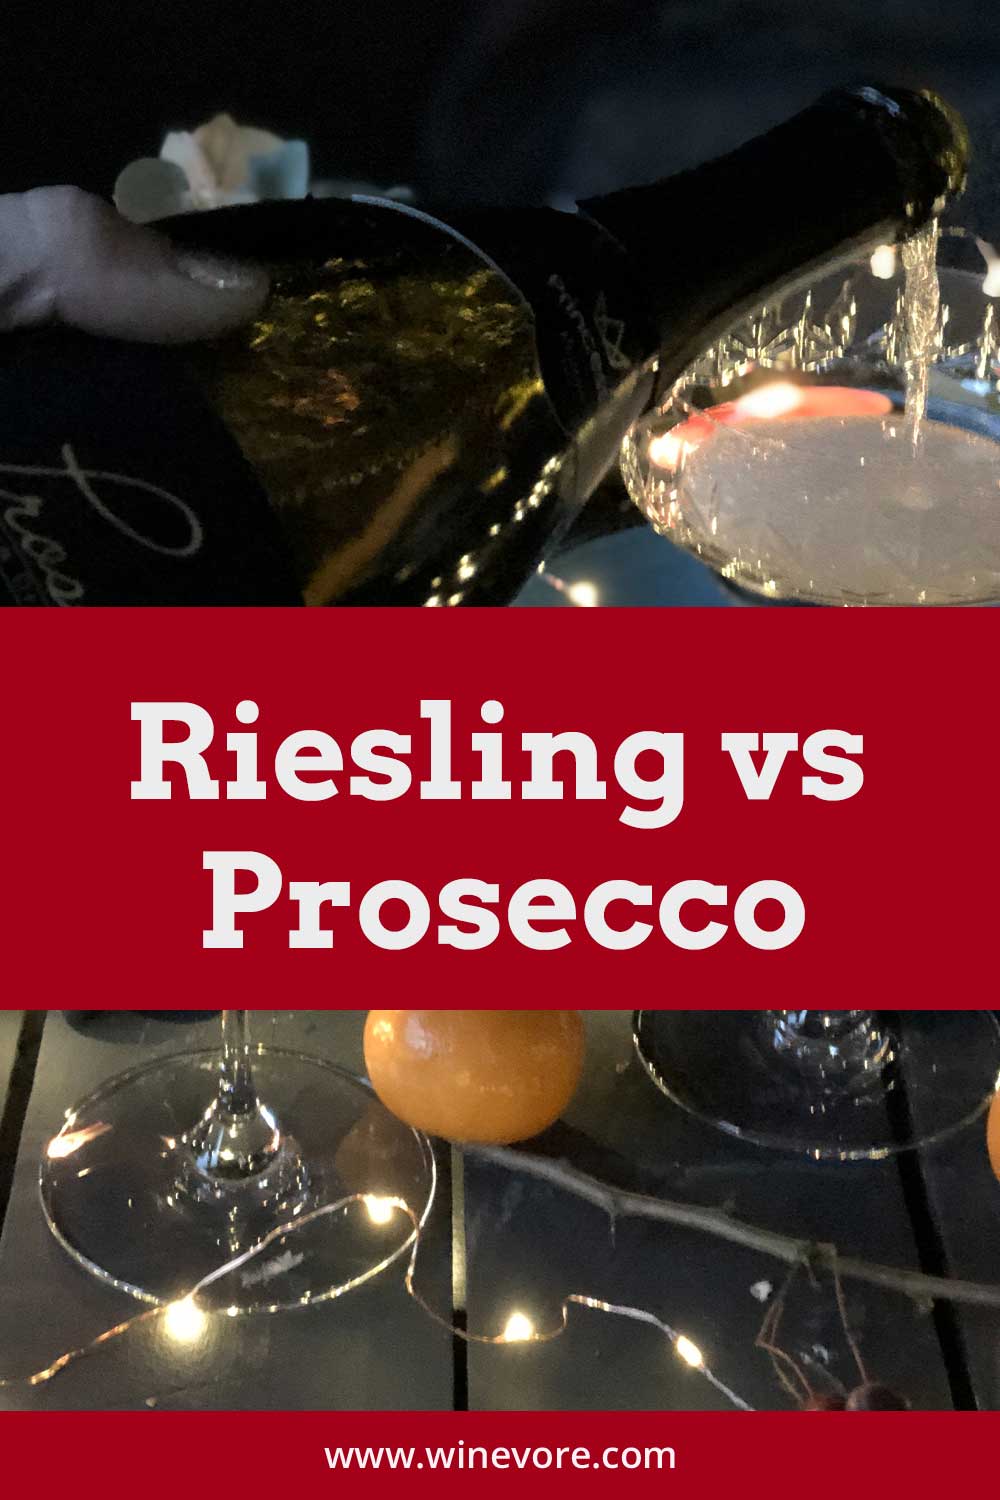 Pouring white wine into a glass from a bottle in hand - Riesling vs. Prosecco.